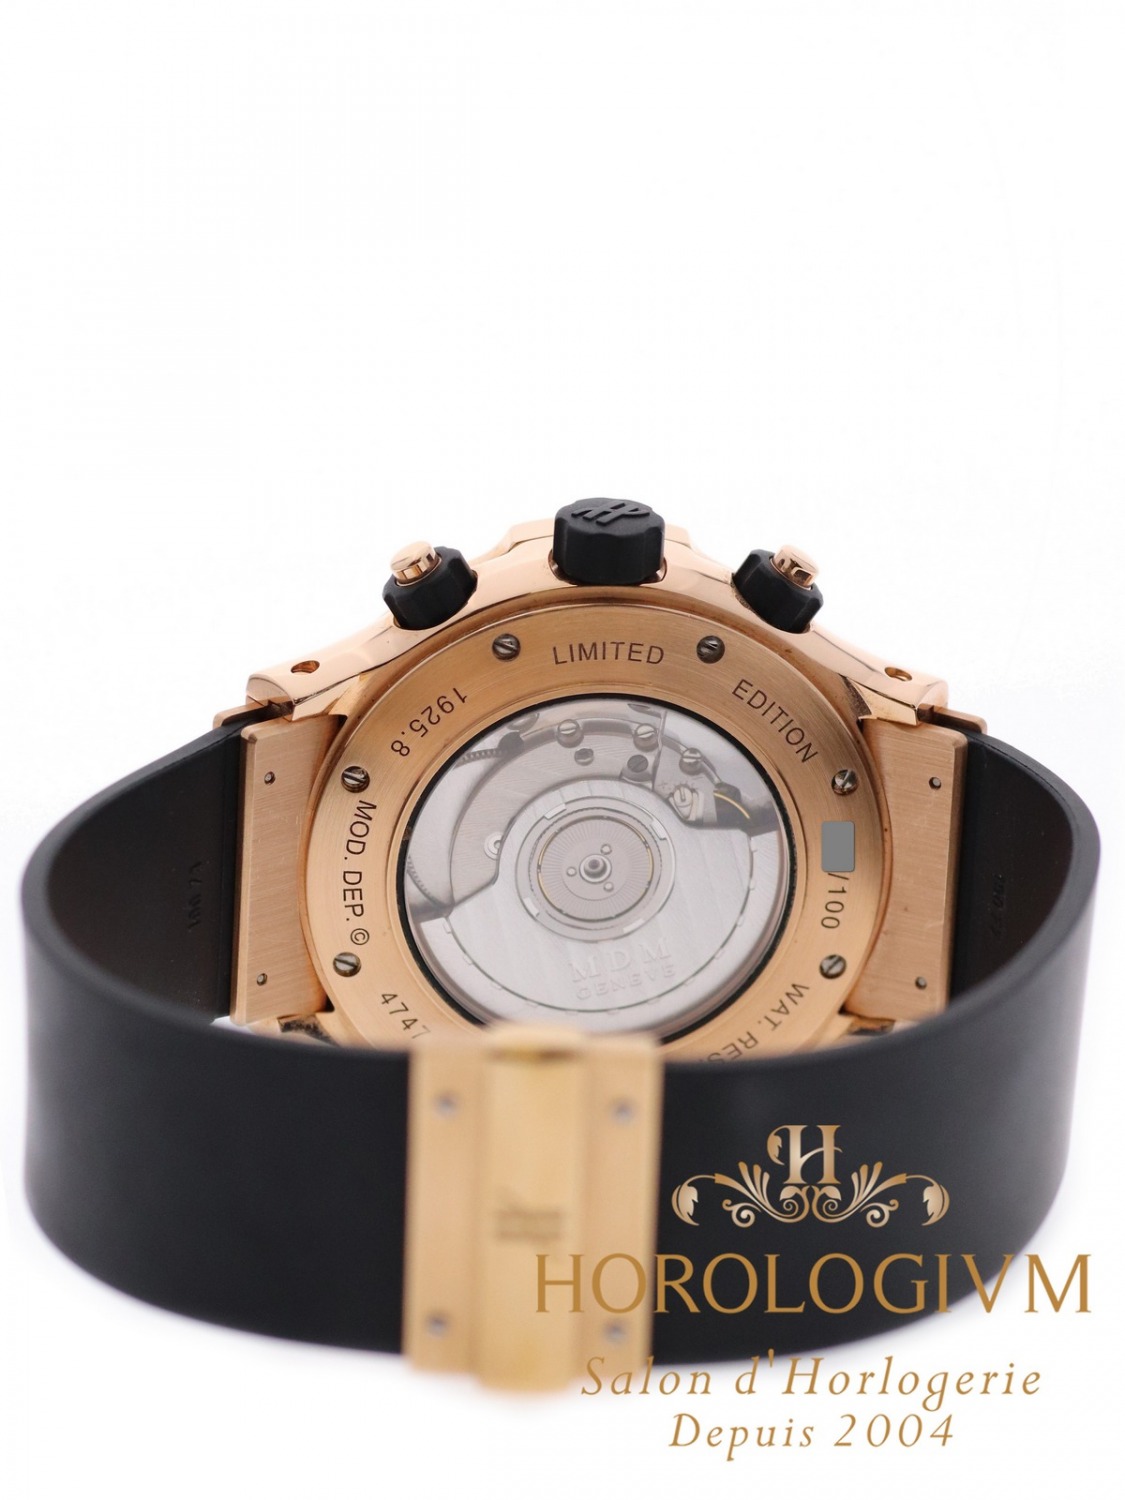 Hublot Super B MDM Flyback Chronograph - Limited Edition of 100 Pieces watch, rose gold